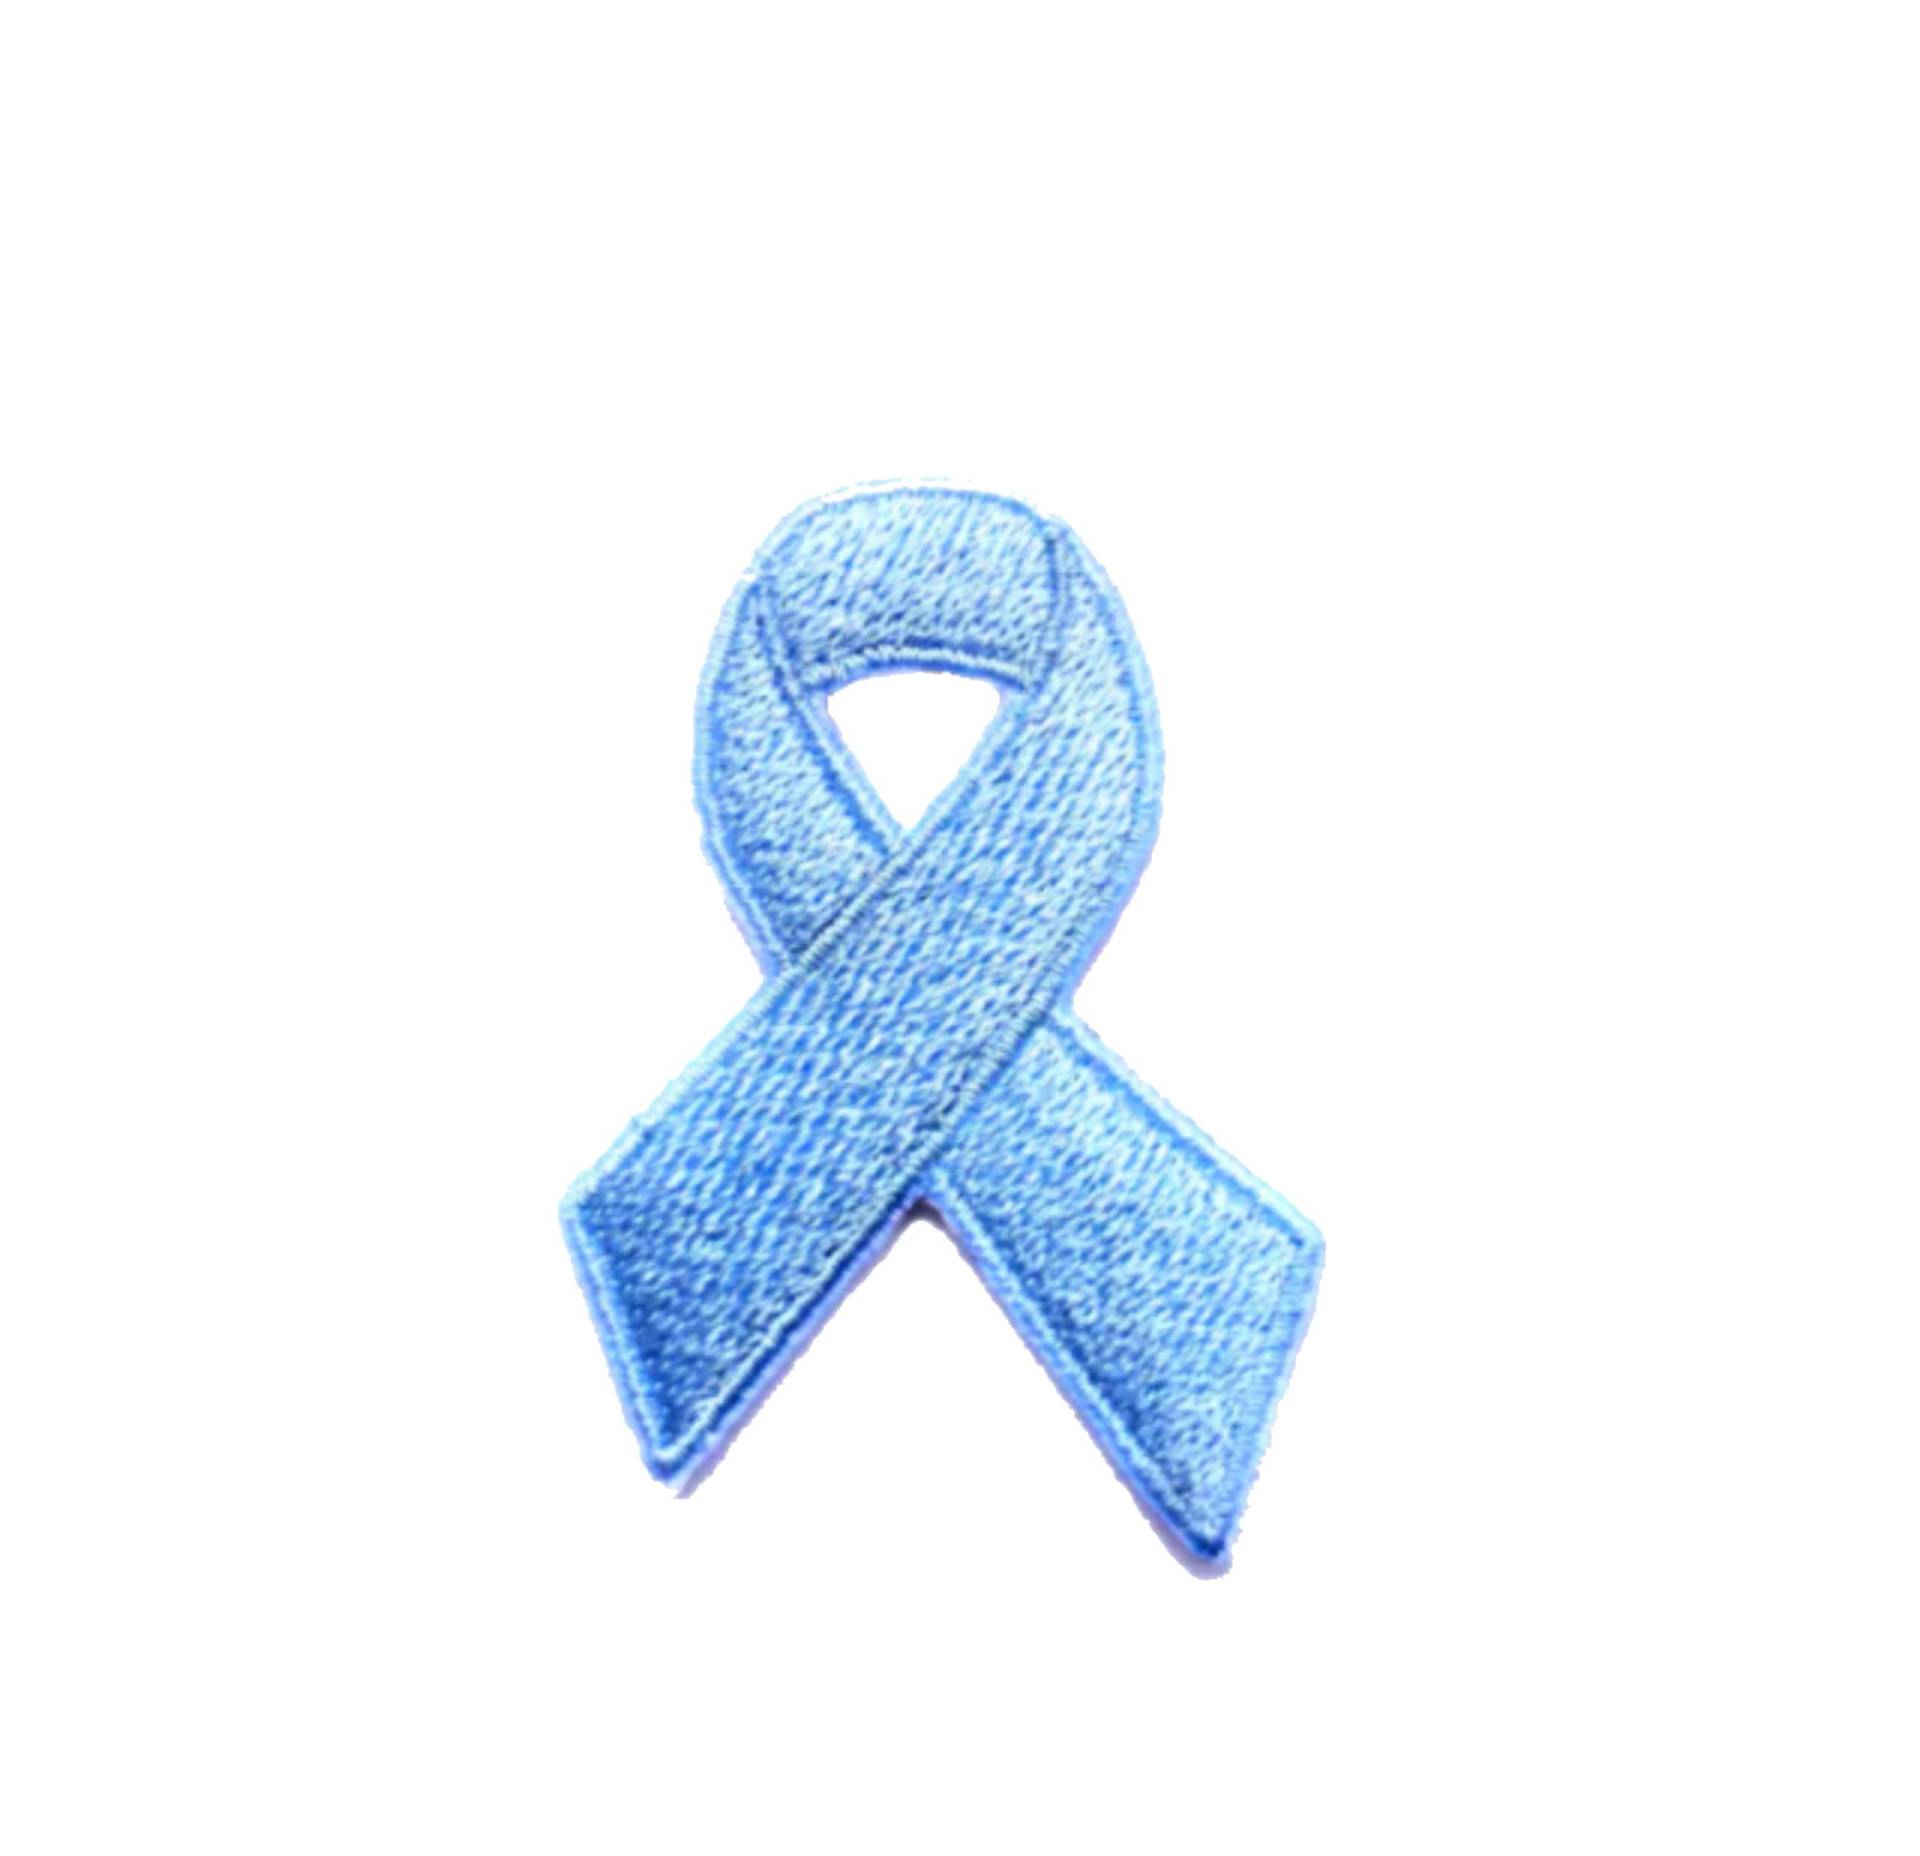 Prostate Cancer Awareness Ribbon Embroidered Iron On Patch Gifts Fundraising Applique For Vest Jacket Clothing Bags Backpacks von BlueHeronSales